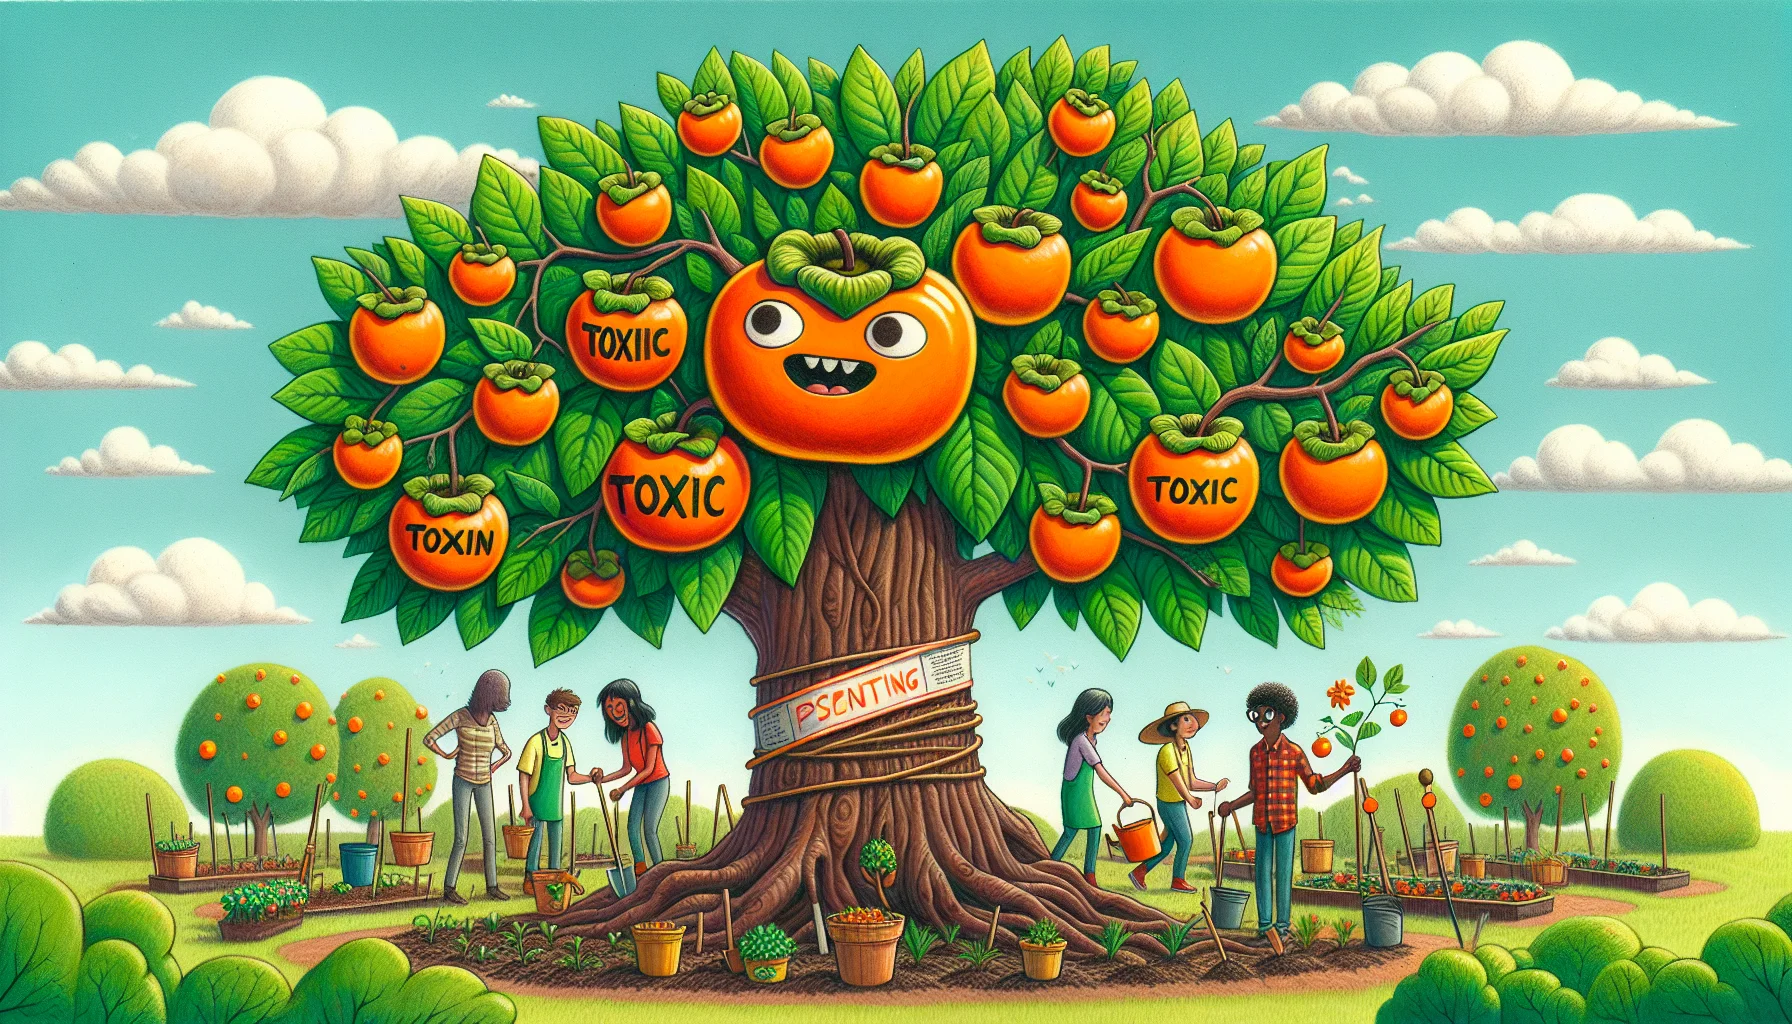 Create a whimsical garden scene involving a sentient persimmon tree. The tree has emerald green leaves, sturdy brown bark, and is overflowing with orange persimmons. The tree has a face on its trunk that exhibits a humorous expression. One of the persimmons has 'TOXIC' written on it in bold, black letters - a comic nod to the belief that persimmon skin is toxic. Around the tree, you can see people of various genders and descents - Caucasian, Hispanic, Black, Middle-Eastern, and South Asian - engaging in gardening, their faces lit up in joy and laughter. The sun is shining, the sky is blue with fluffy white clouds, and everyone is having a good time.